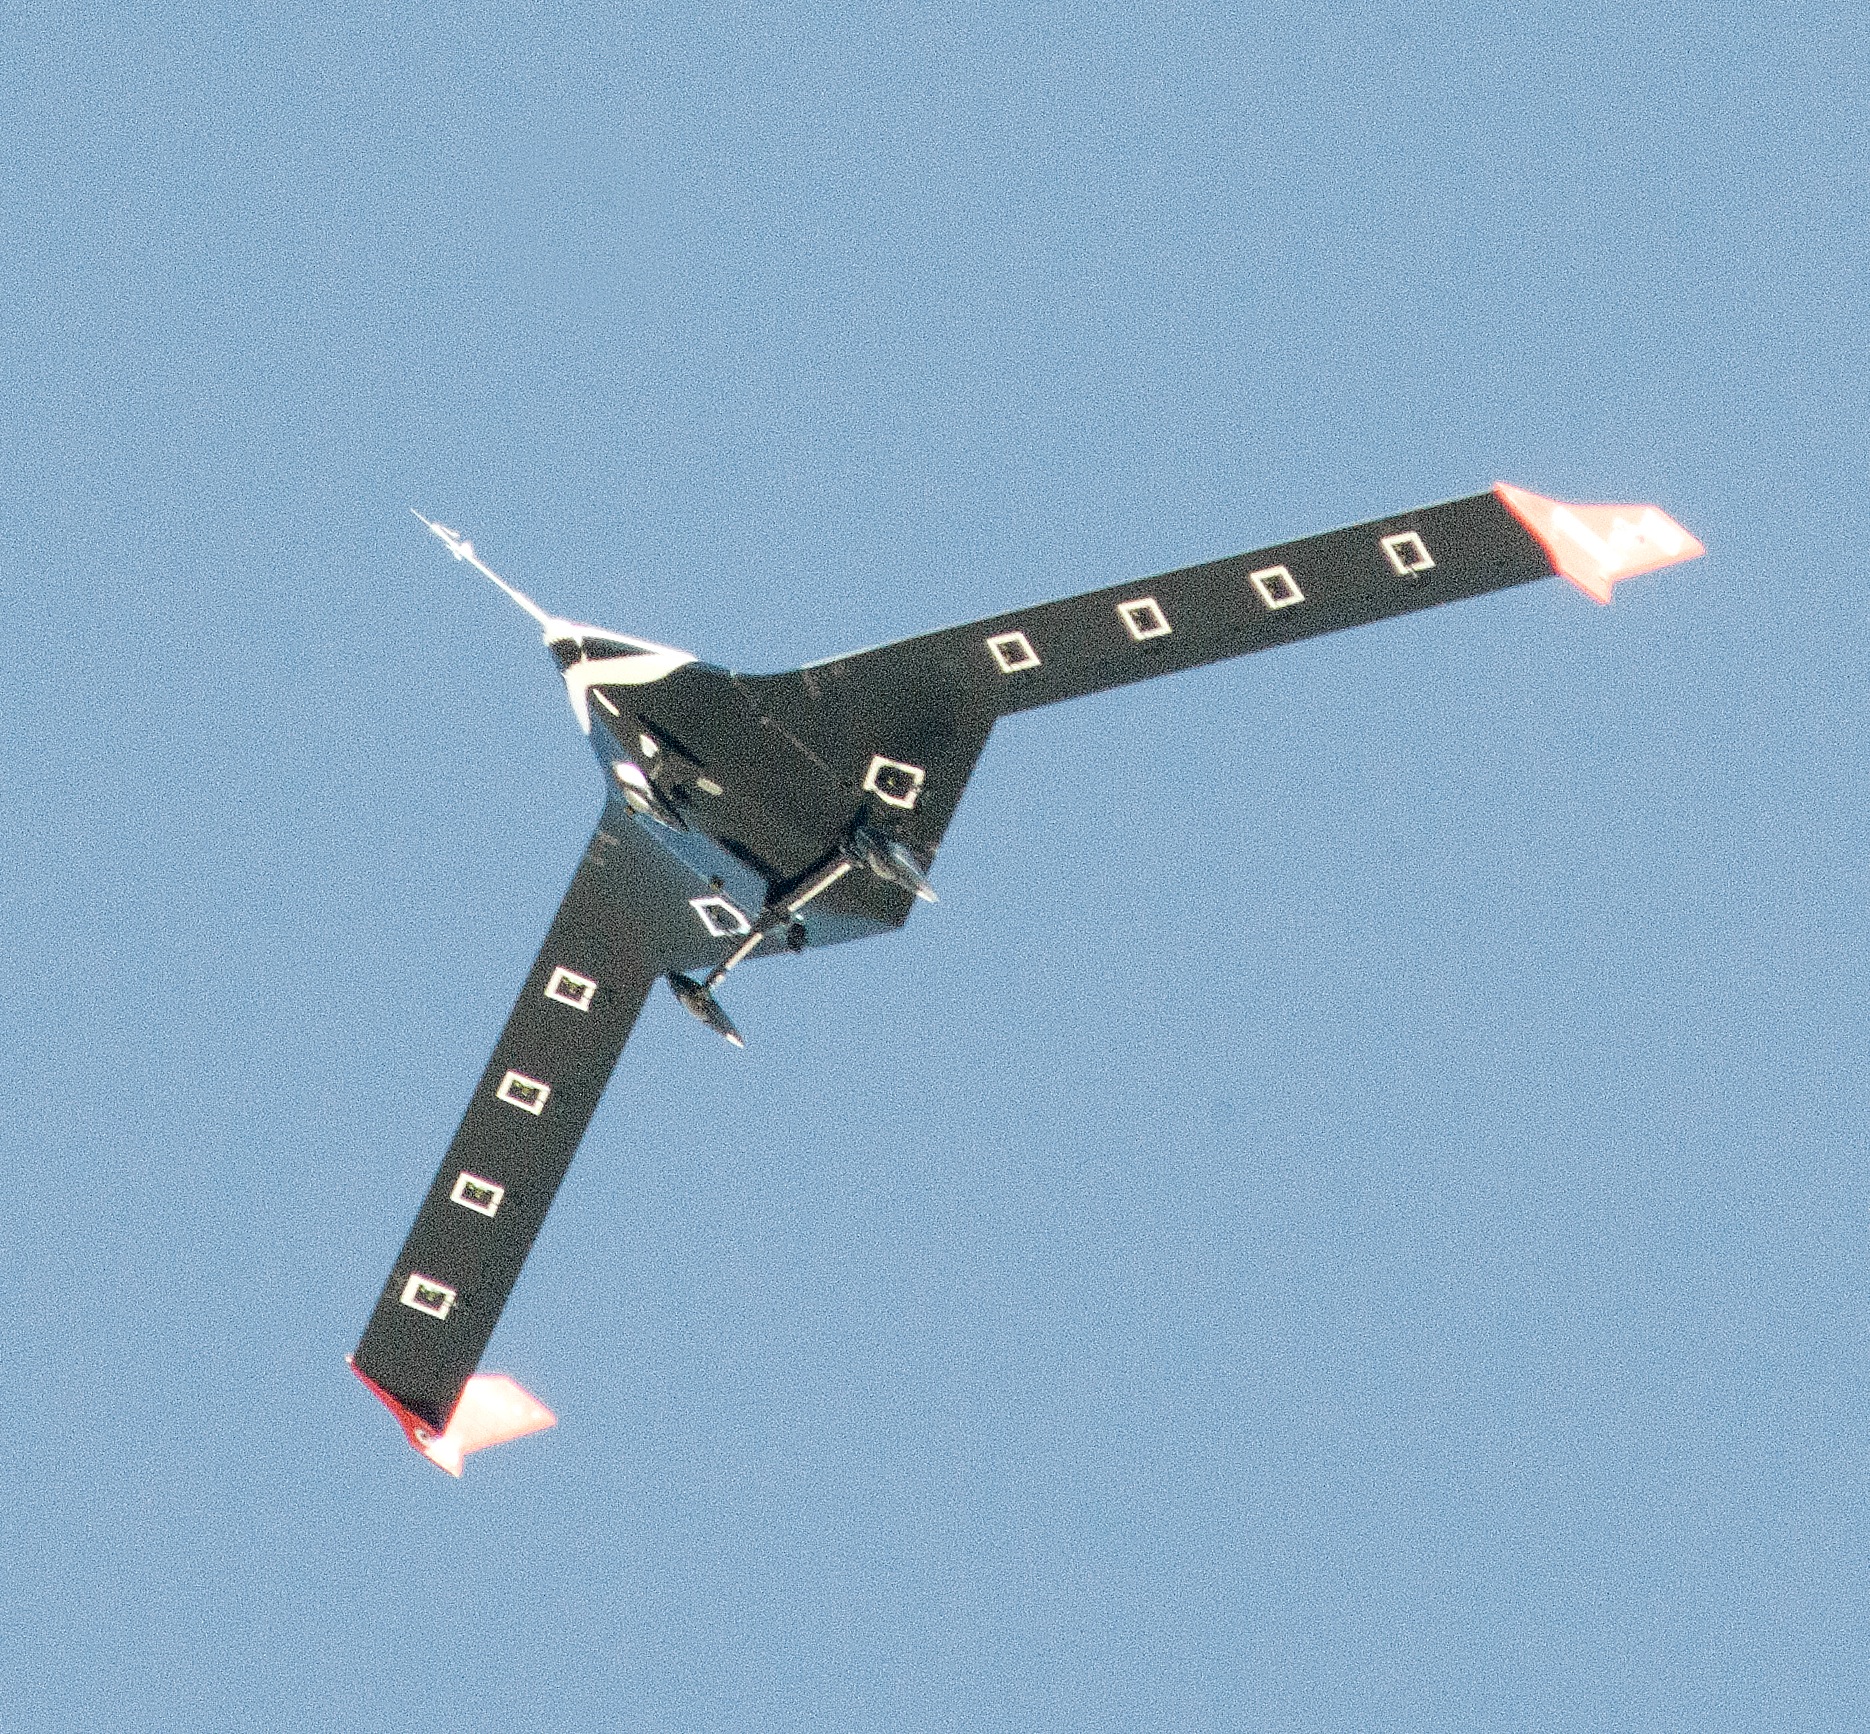 The X-56A is shown overhead in flight. The view is of the belly of the aircraft.